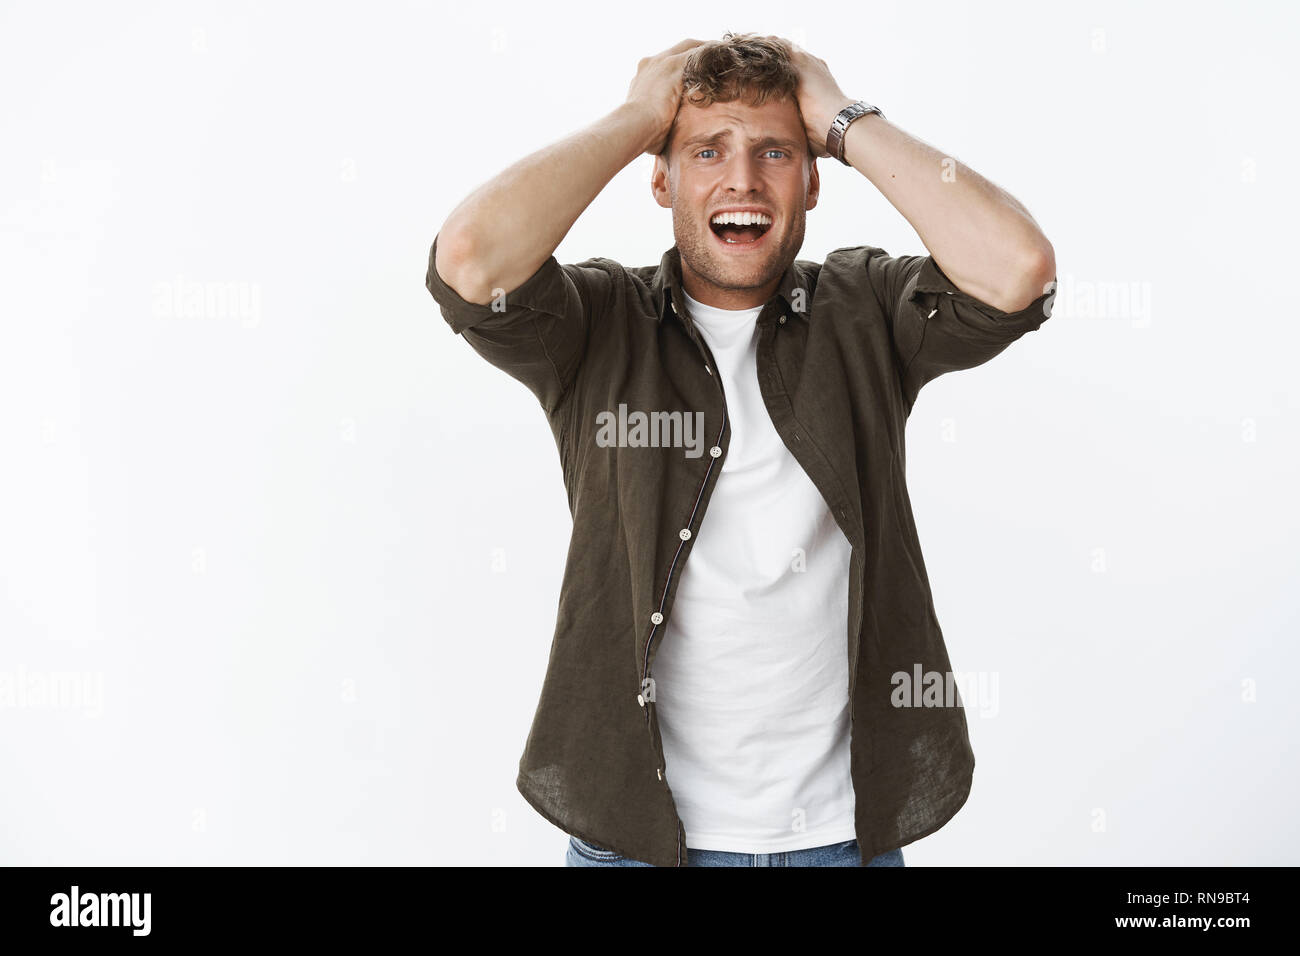 Guy losing everything standing in despair and panic pulling hair of head yelling suffering painful heartbreak, grimacing in sorrow and disappointed Stock Photo